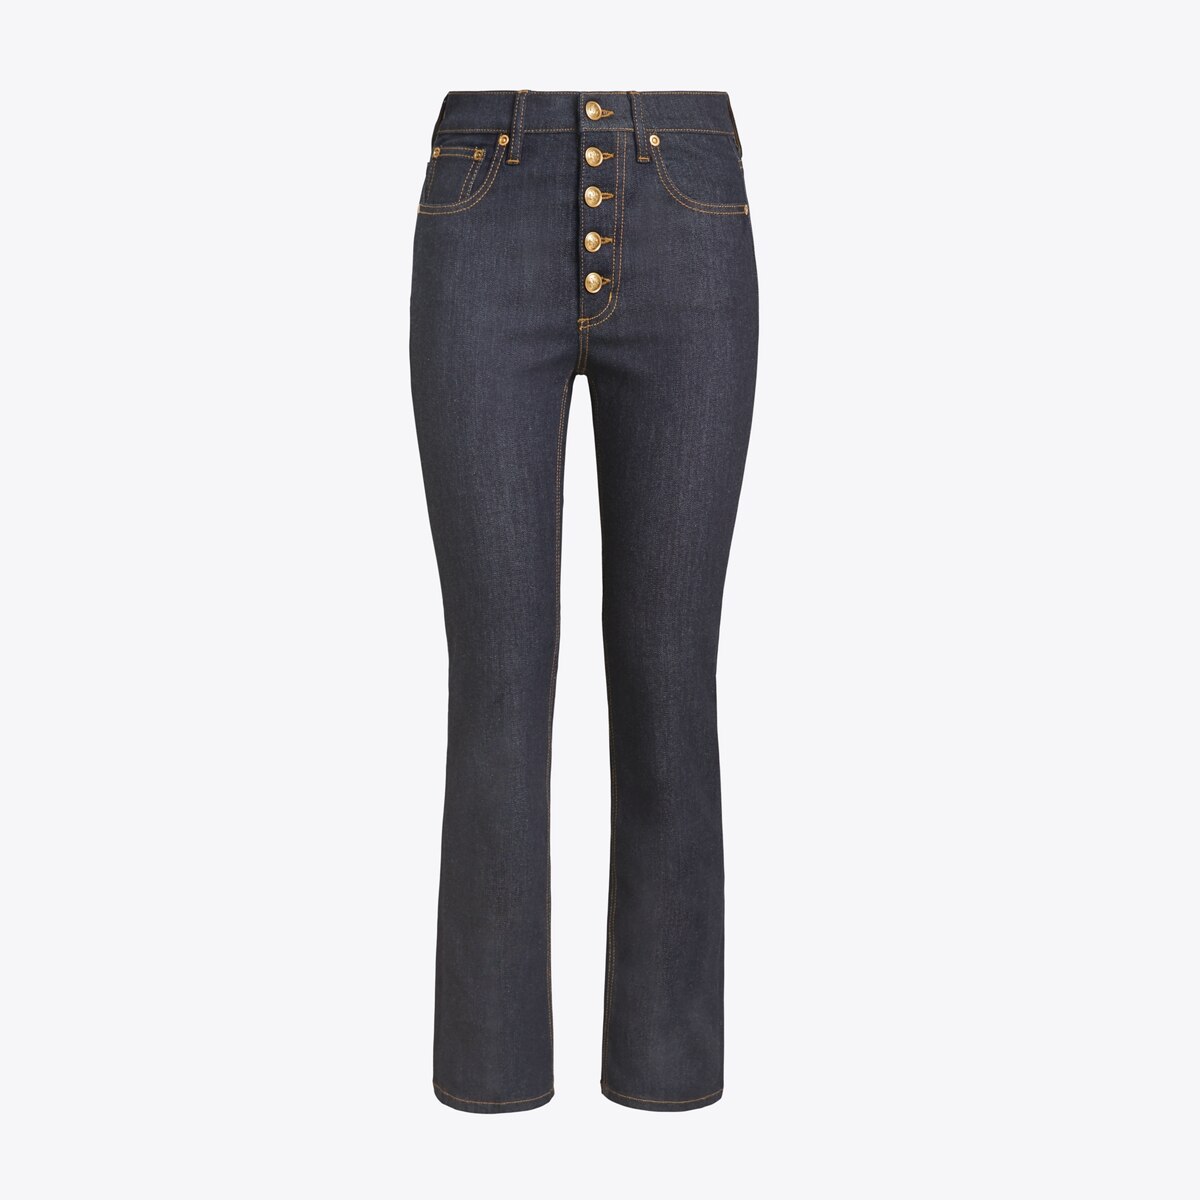 mott and bow womens jeans review